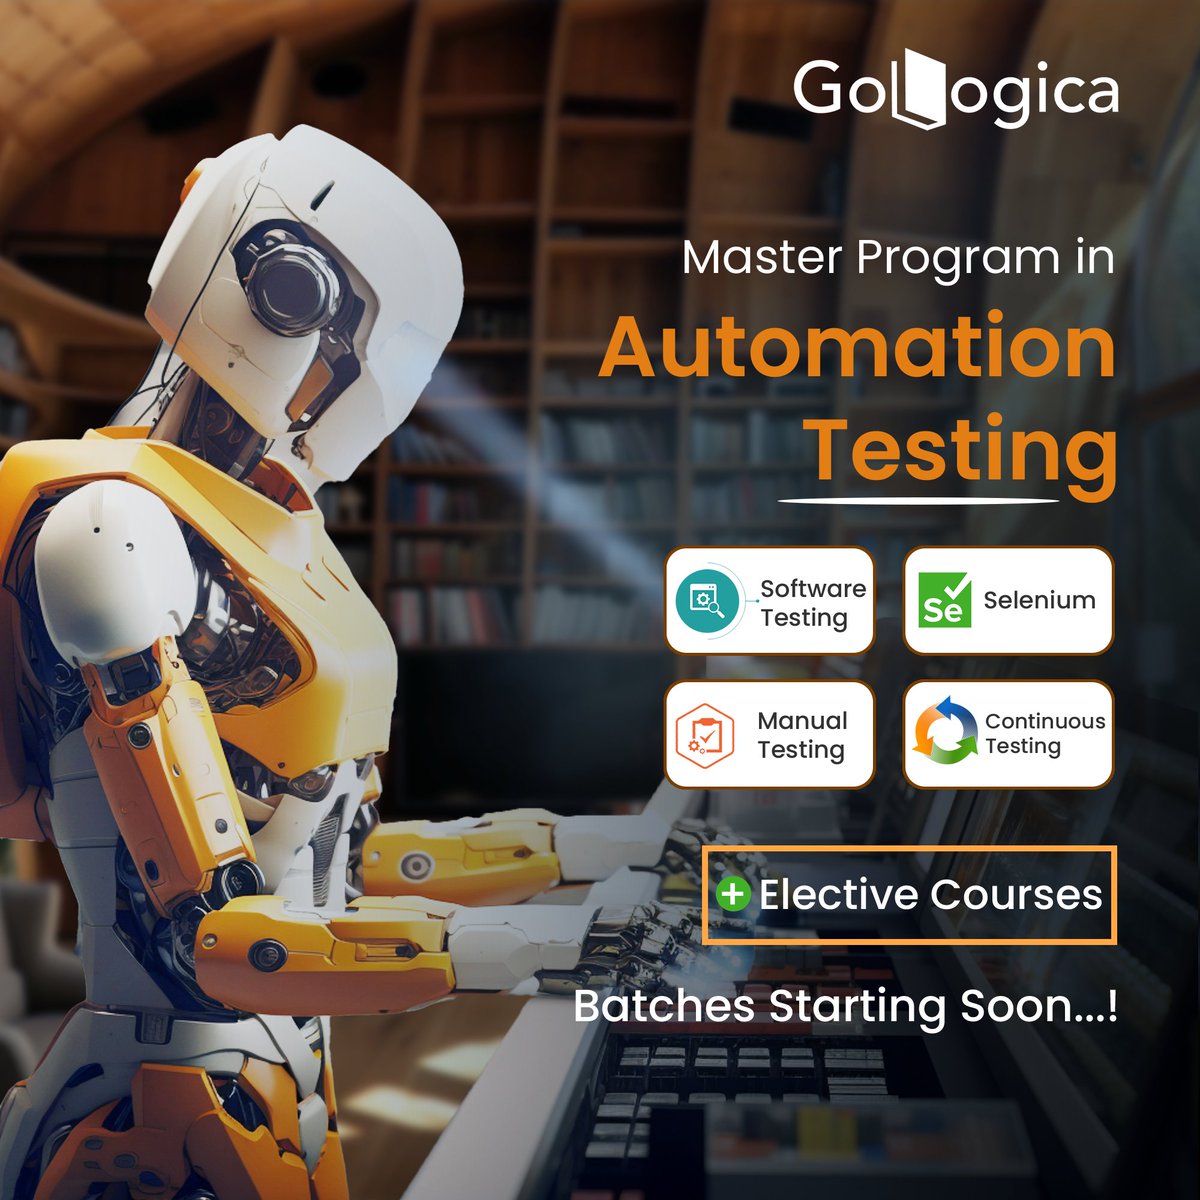 Ready to level up your testing skills?

Become a master of automation testing with GoLogica master program!

For More Details: gologica.com

#AutomationTesting #Selenium #ManualTesting #ContinuousTesting #GoLogica #TestingMasterProgram #testscripts #defectmanagement